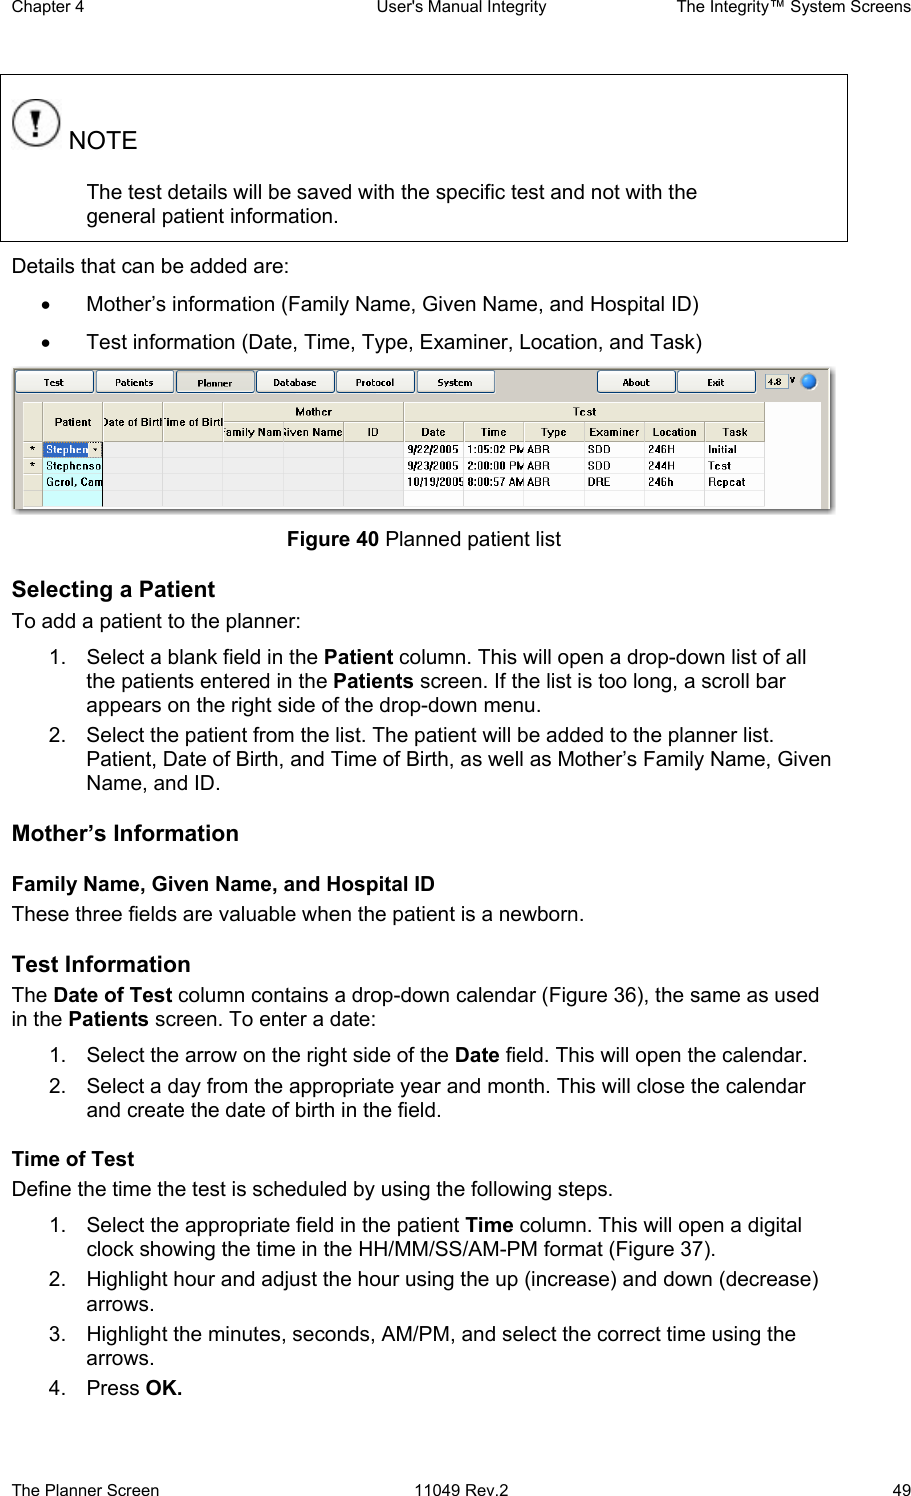 Chapter 4  User&apos;s Manual Integrity  The Integrity™ System Screens The Planner Screen  11049 Rev.2  49  NOTE The test details will be saved with the specific test and not with the general patient information. Details that can be added are: •  Mother’s information (Family Name, Given Name, and Hospital ID) •  Test information (Date, Time, Type, Examiner, Location, and Task)  Figure 40 Planned patient list Selecting a Patient To add a patient to the planner:  1.  Select a blank field in the Patient column. This will open a drop-down list of all the patients entered in the Patients screen. If the list is too long, a scroll bar appears on the right side of the drop-down menu.  2.  Select the patient from the list. The patient will be added to the planner list. Patient, Date of Birth, and Time of Birth, as well as Mother’s Family Name, Given Name, and ID. Mother’s Information Family Name, Given Name, and Hospital ID These three fields are valuable when the patient is a newborn.  Test Information The Date of Test column contains a drop-down calendar (Figure 36), the same as used in the Patients screen. To enter a date:  1.  Select the arrow on the right side of the Date field. This will open the calendar.  2.  Select a day from the appropriate year and month. This will close the calendar and create the date of birth in the field. Time of Test Define the time the test is scheduled by using the following steps. 1.  Select the appropriate field in the patient Time column. This will open a digital clock showing the time in the HH/MM/SS/AM-PM format (Figure 37).  2.  Highlight hour and adjust the hour using the up (increase) and down (decrease) arrows. 3.  Highlight the minutes, seconds, AM/PM, and select the correct time using the arrows. 4. Press OK. 